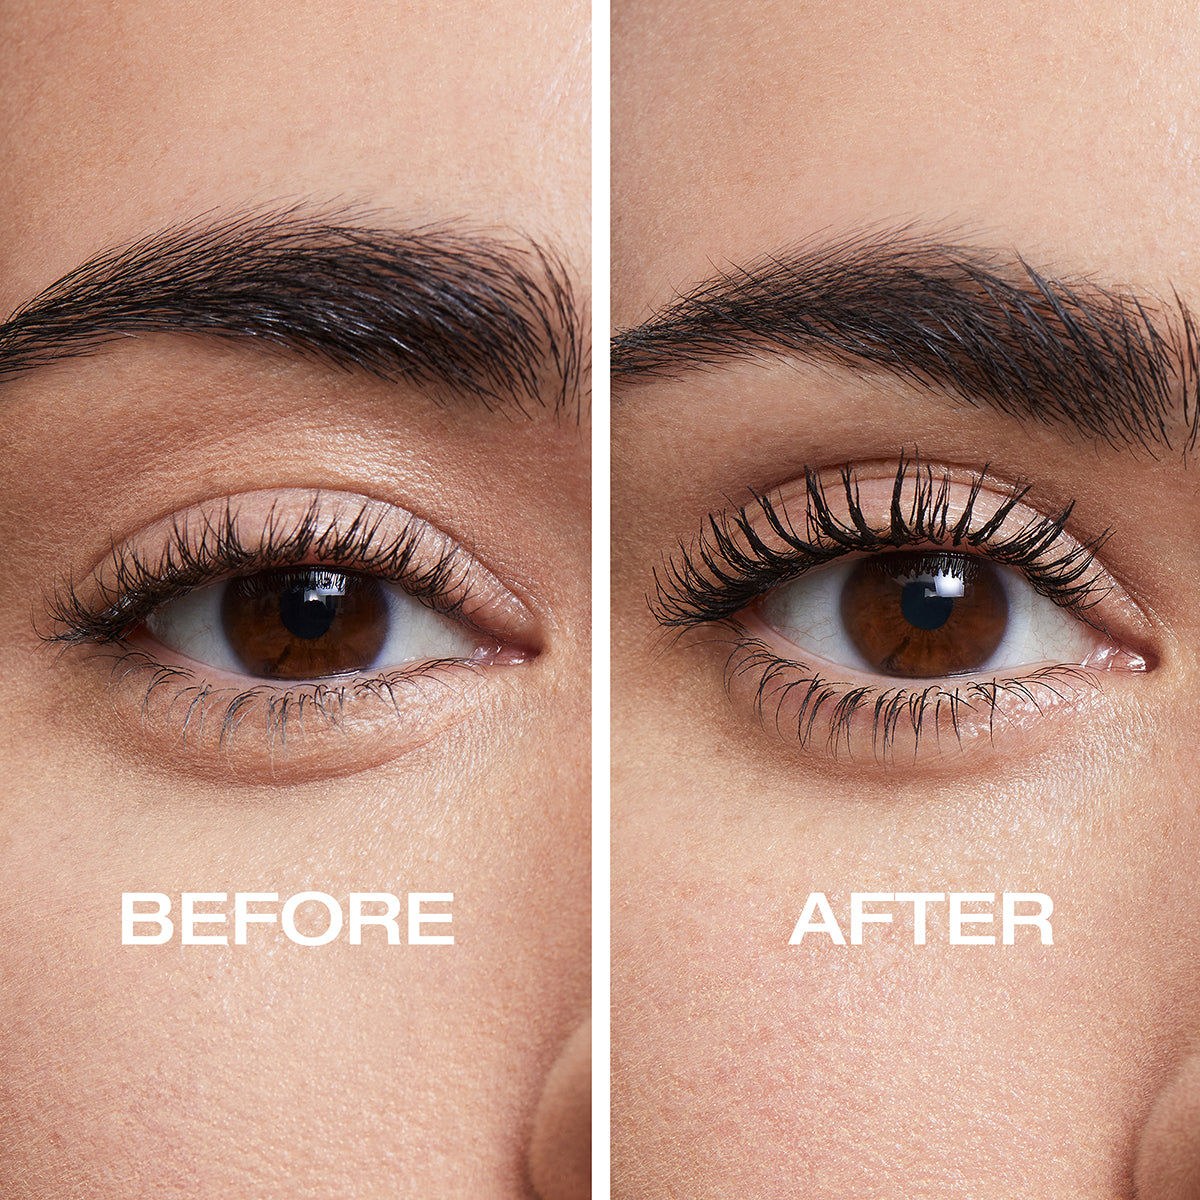 Before and after on an eye with mascara vs. without. The after photo with mascara shows much longer, fuller eyelashes. 